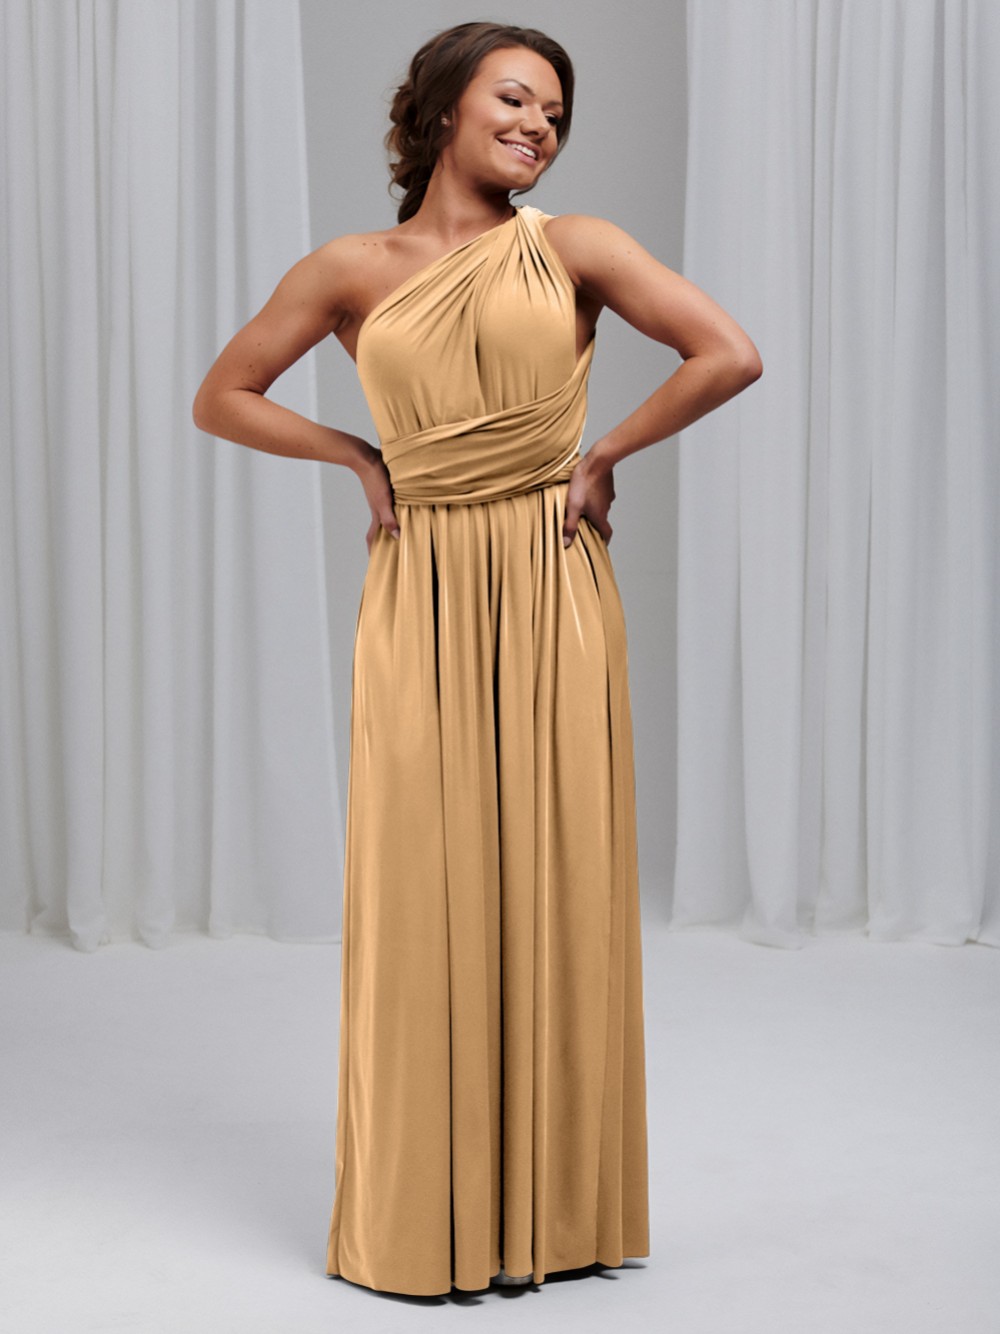 Photograph of Emily Rose Gold Multiway Bridesmaid Dress (One Size)